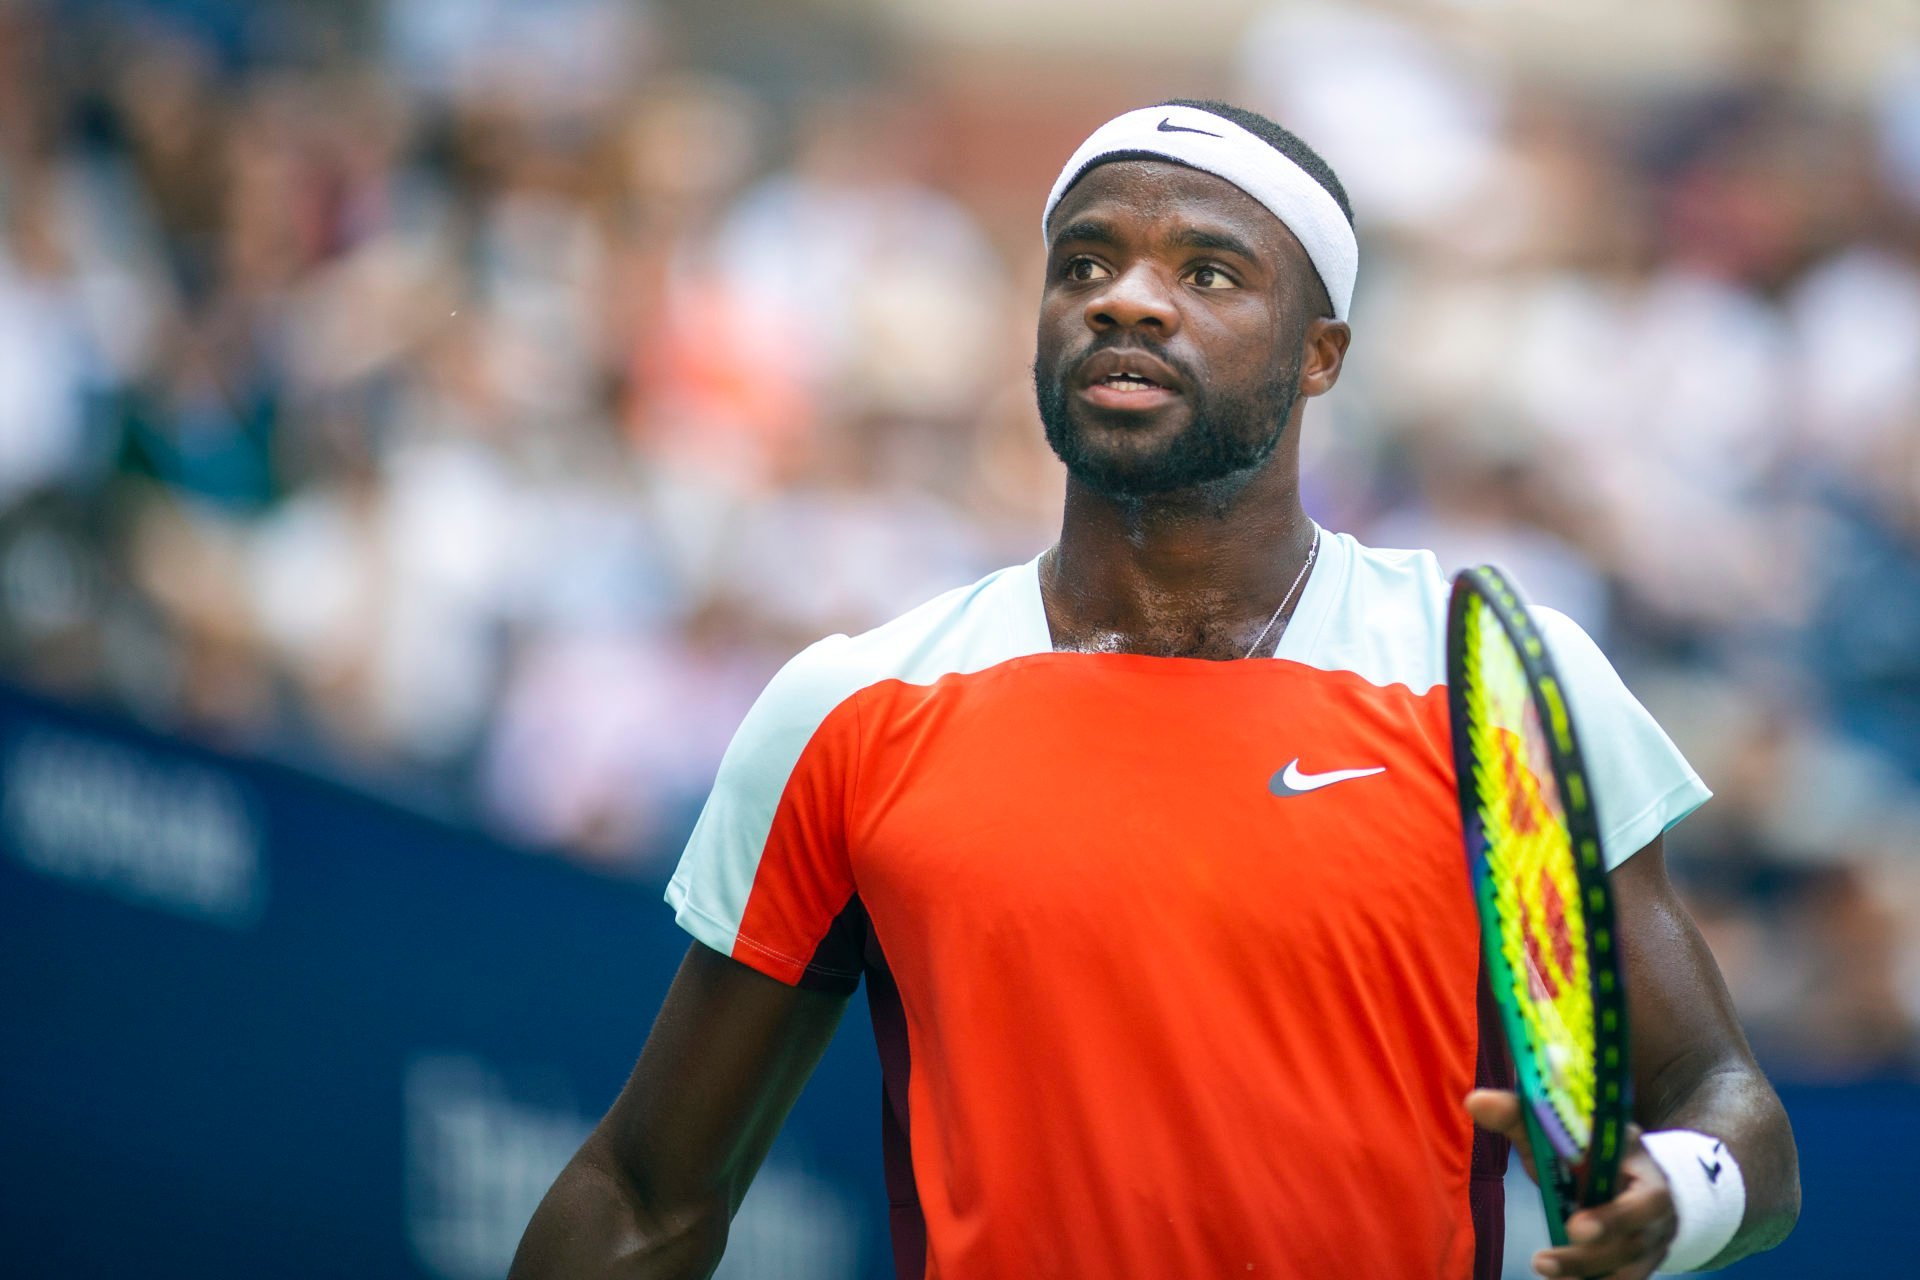 Meet Frances Tiafoe’s twin brother Franklin, who also played tennis growing up